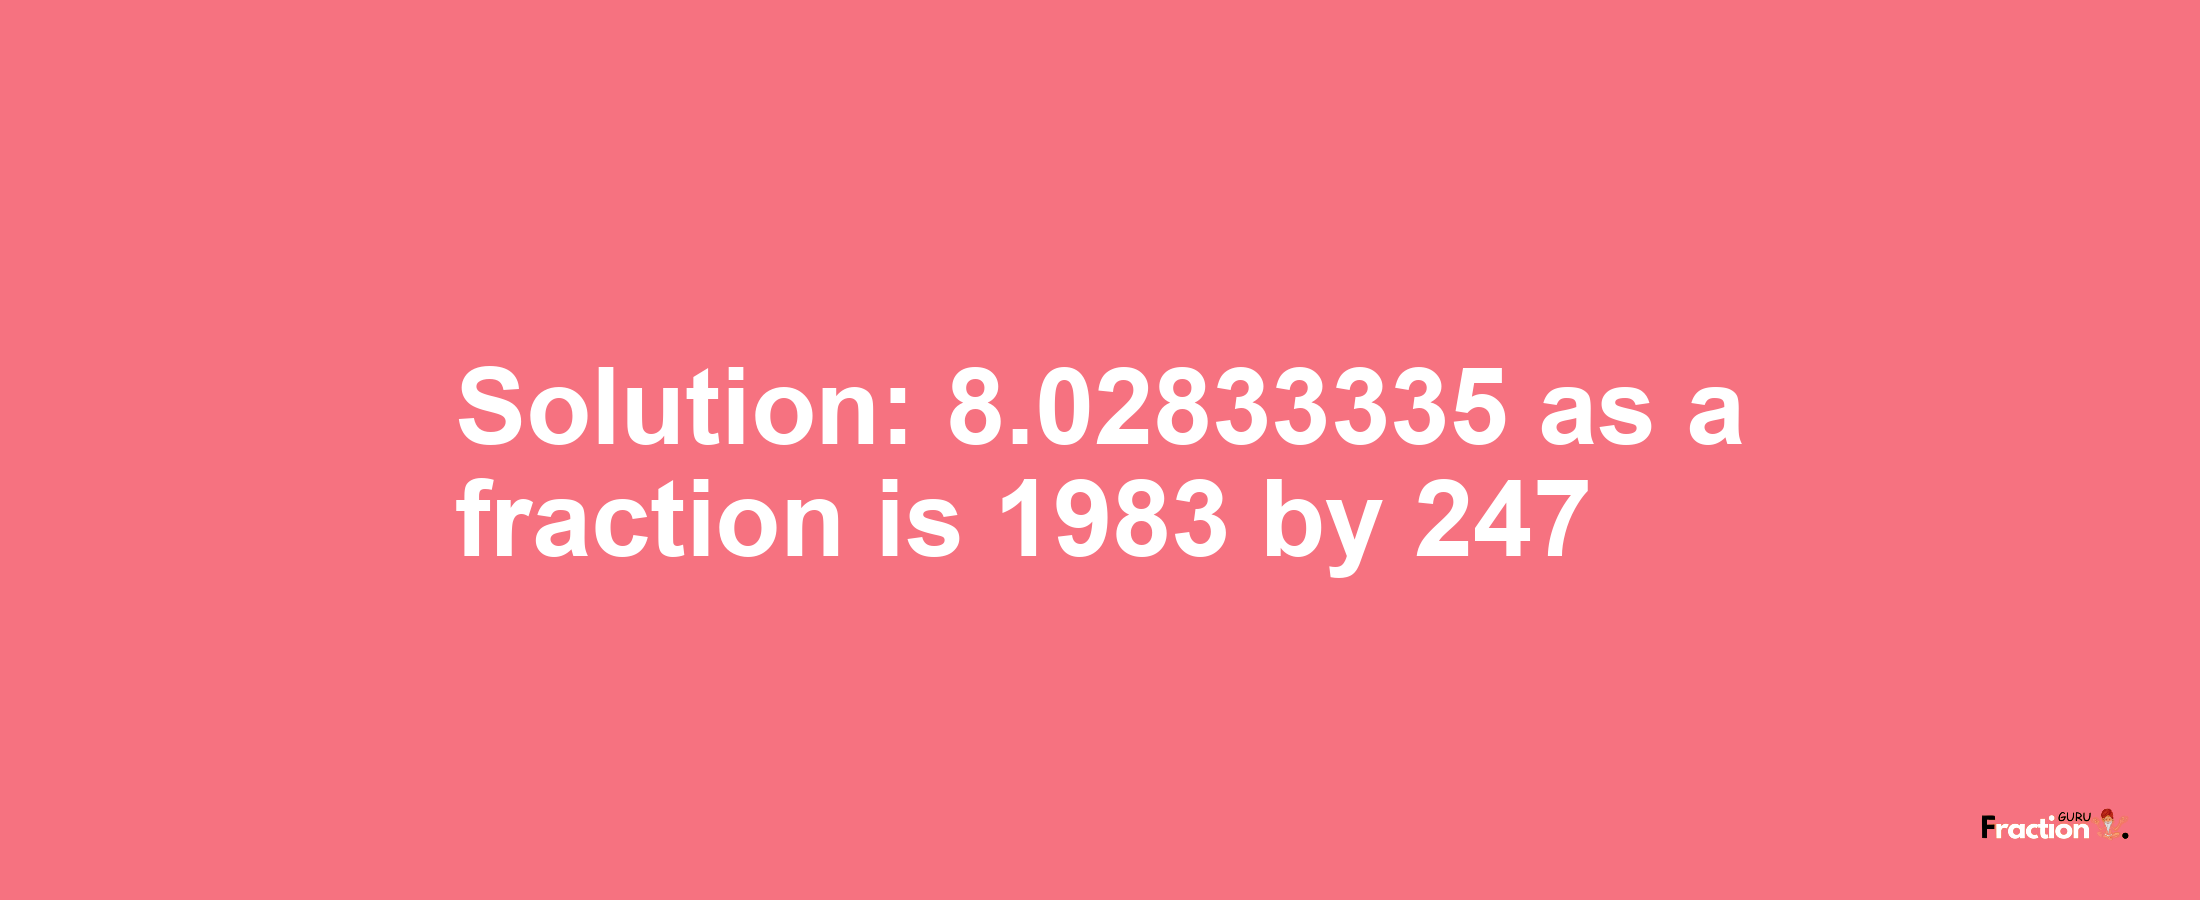 Solution:8.02833335 as a fraction is 1983/247